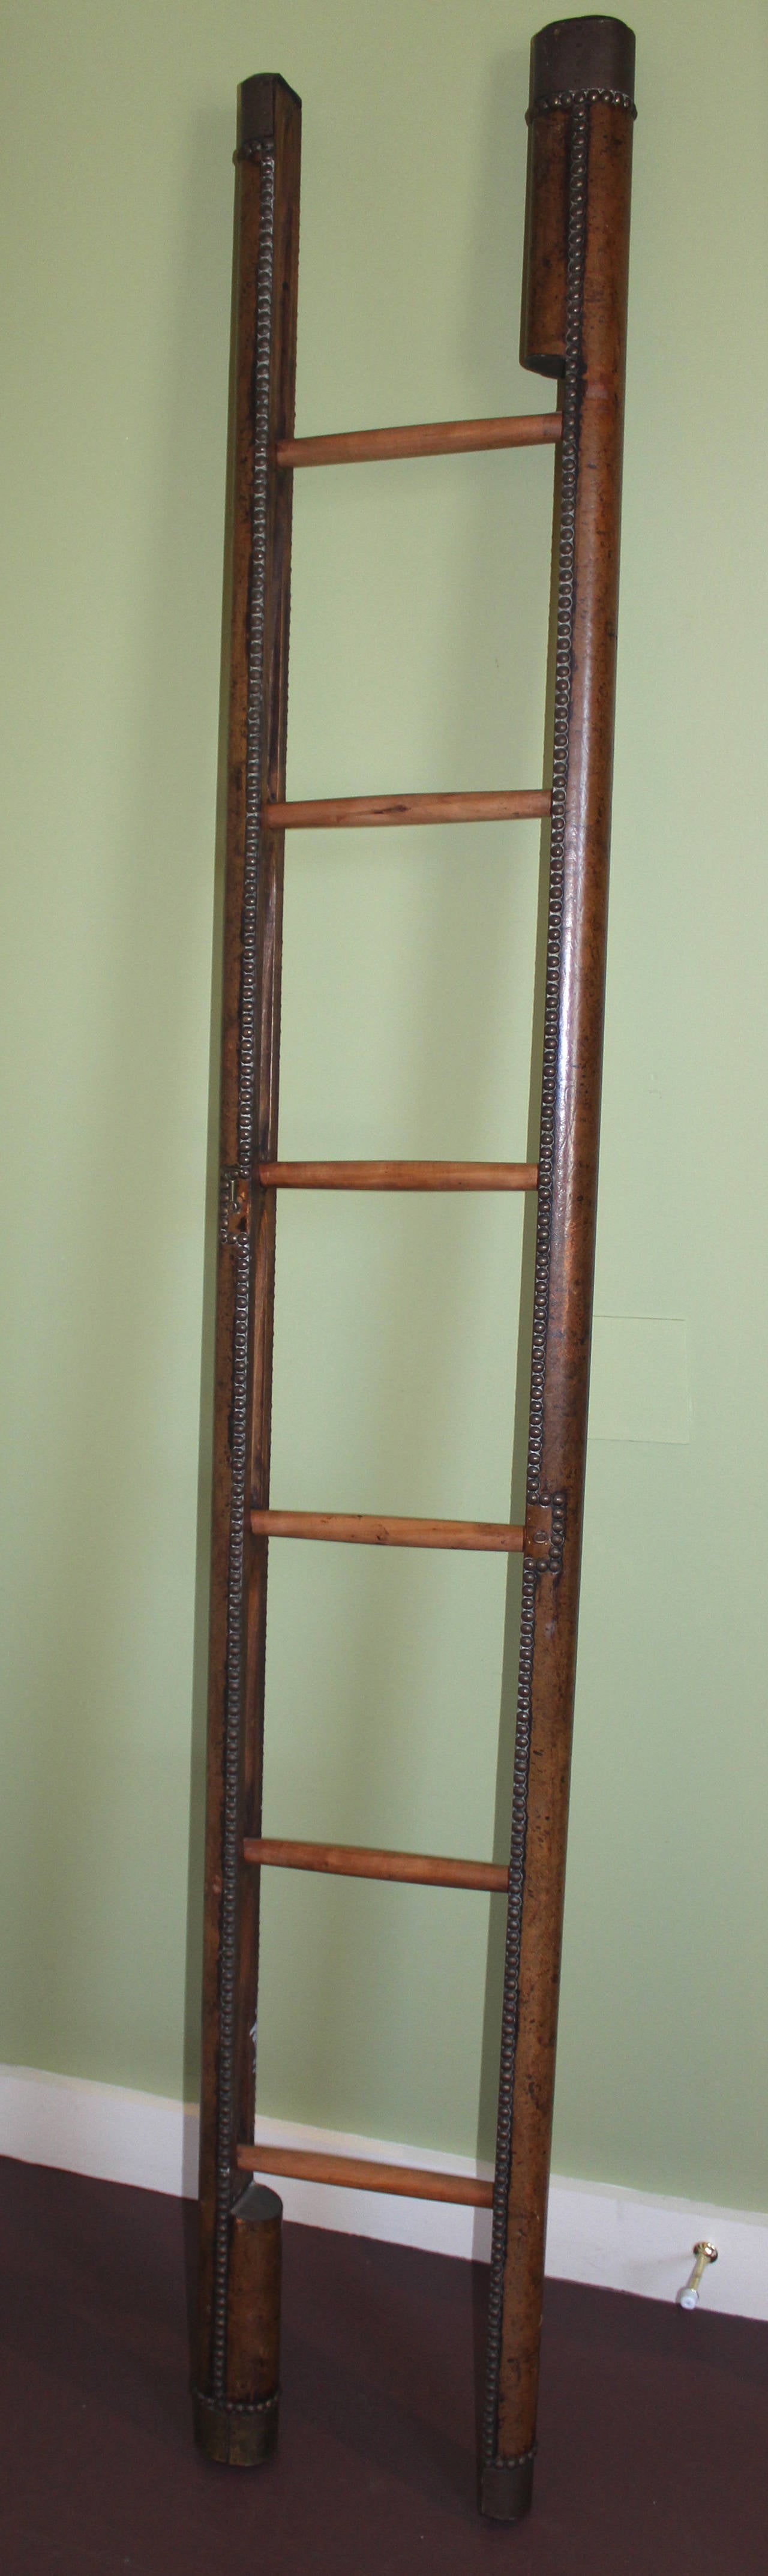 Regency Style Leather-Bound Folding Library Ladder, probably late 19th or early 20th C. English, bound in dark brown leather with brass ends and brass tack trim and latch, the wooden ladder folding into a single unit.